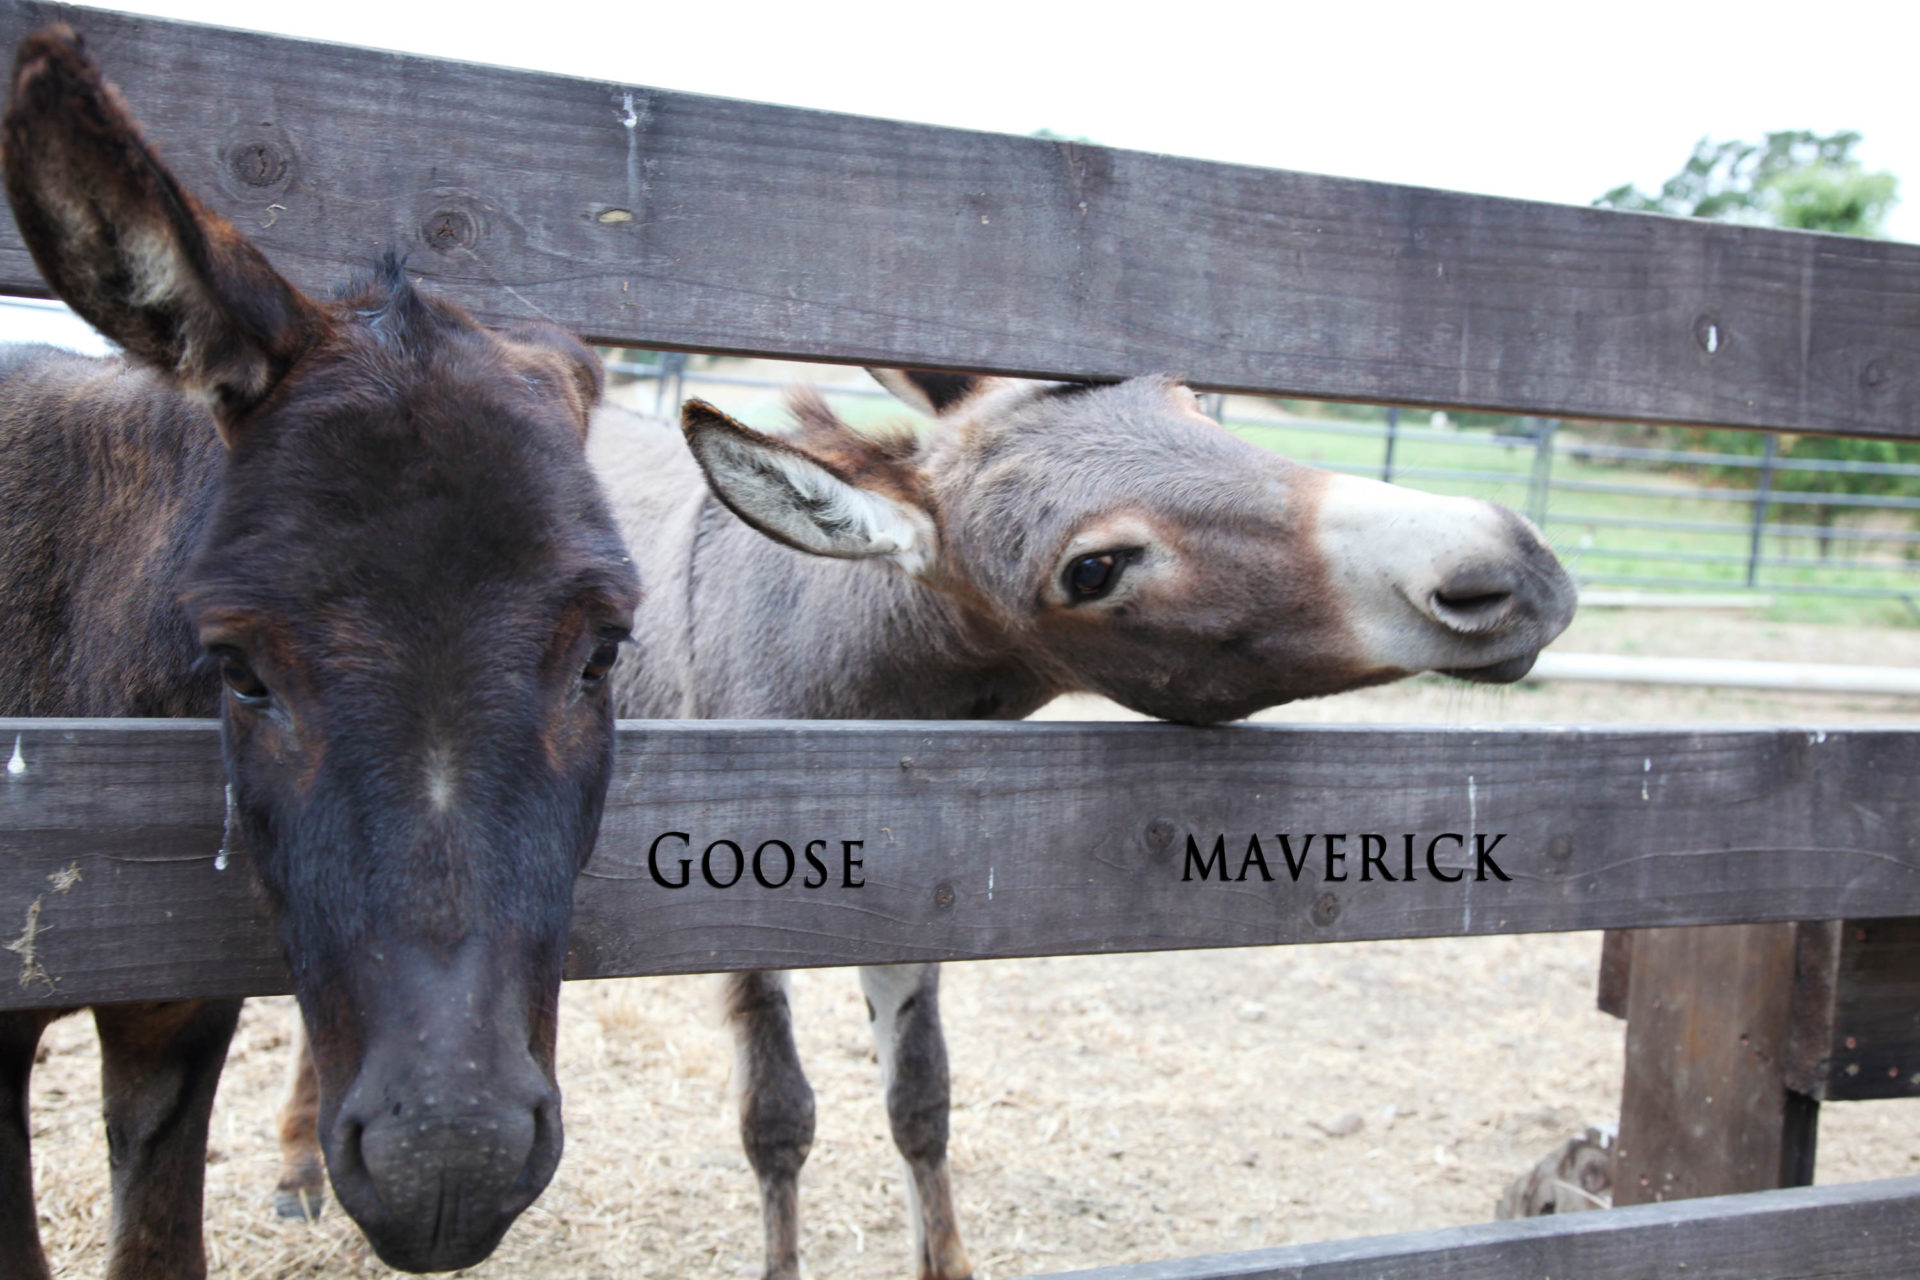 photo of Jordan Winery donkeys sticking their heads through a wooden fence with image text: "Goose. Maverick"